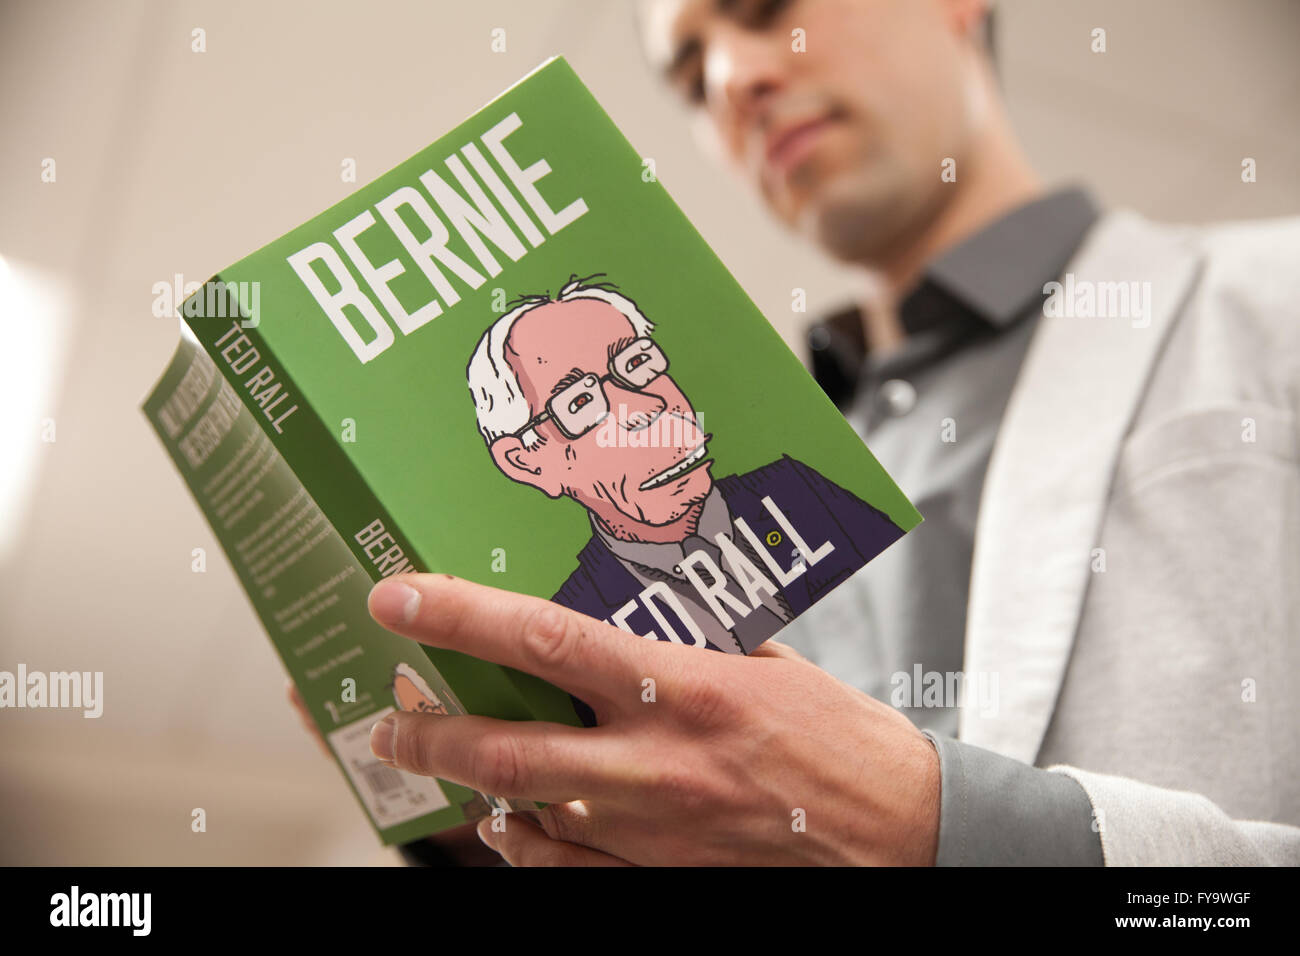 Man reads book about Bernie Sanders. Stock Photo